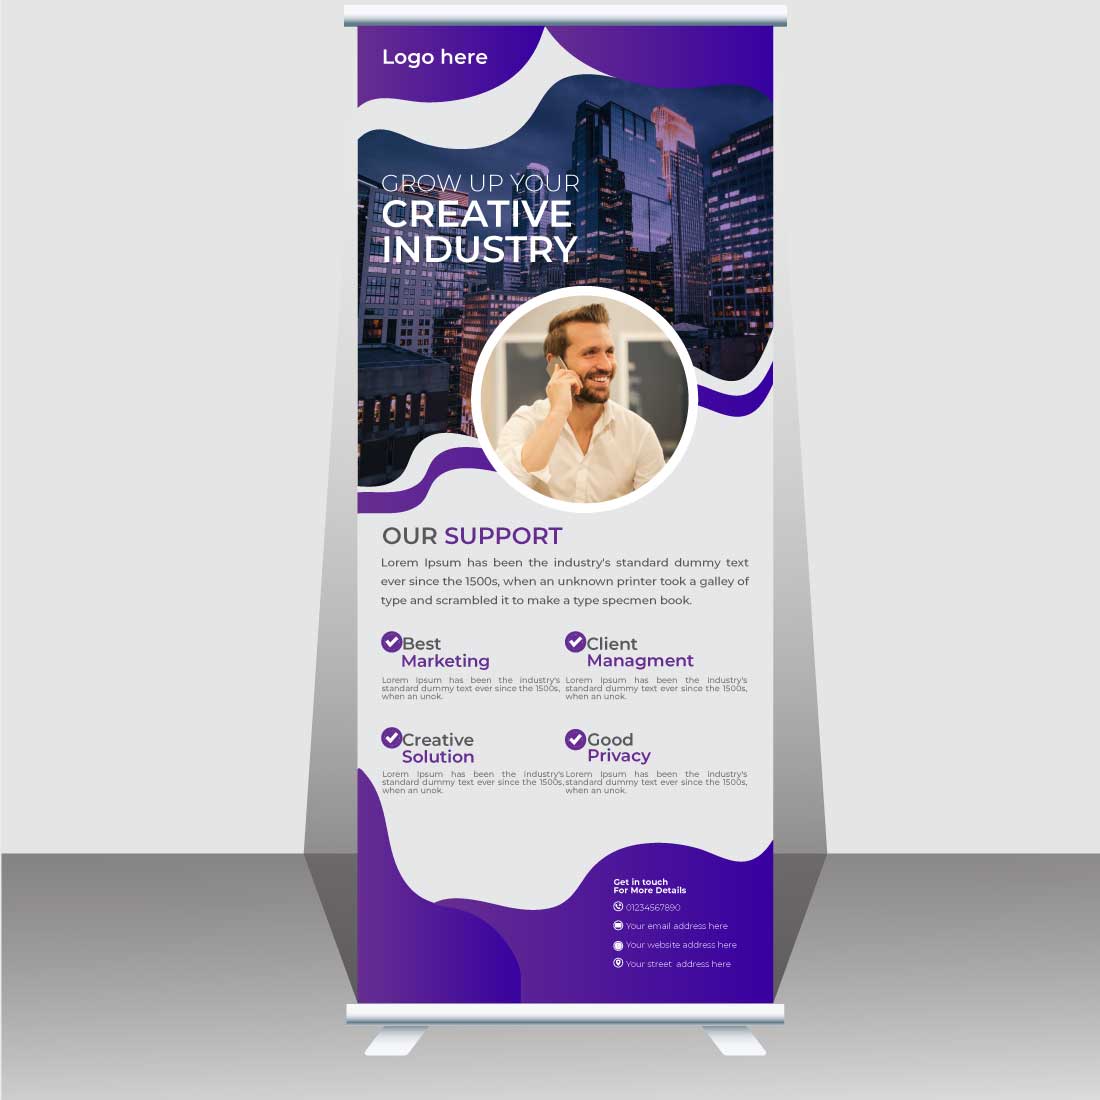 Corporate Business Roll Up Banner main cover